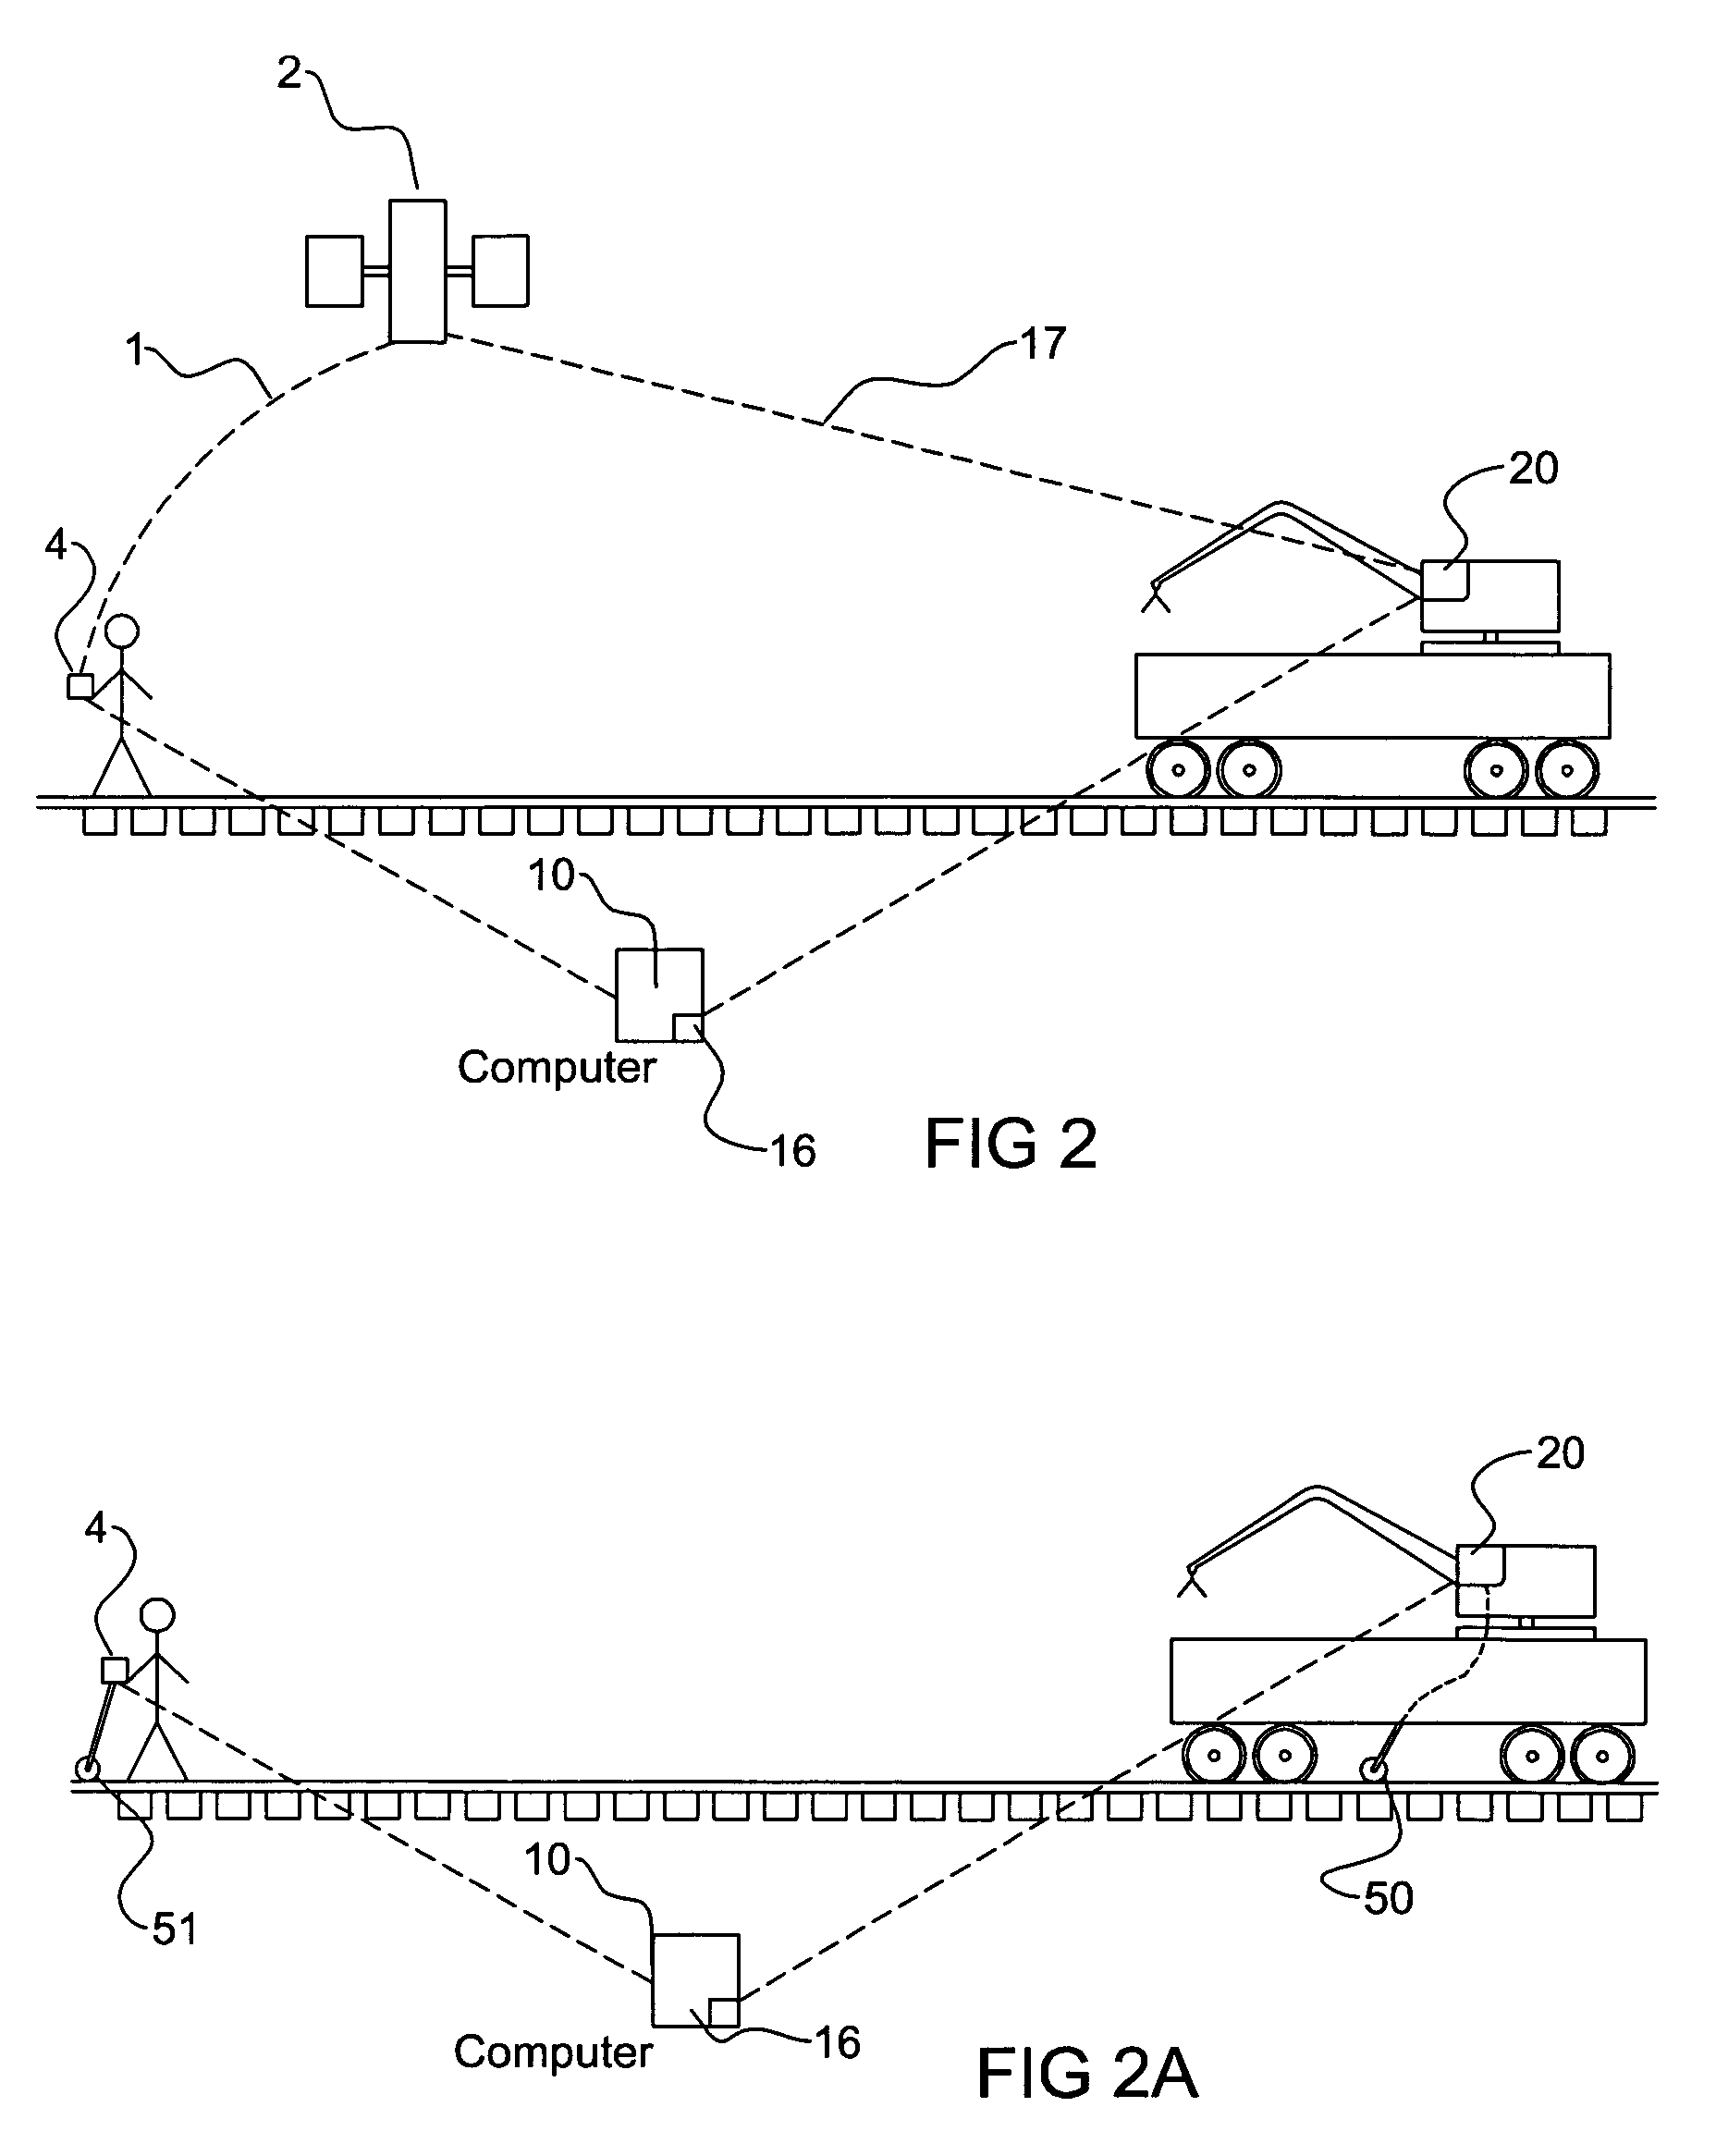 Method and apparatus for adaptive coordinated distribution of materials in railway maintenance and other applications